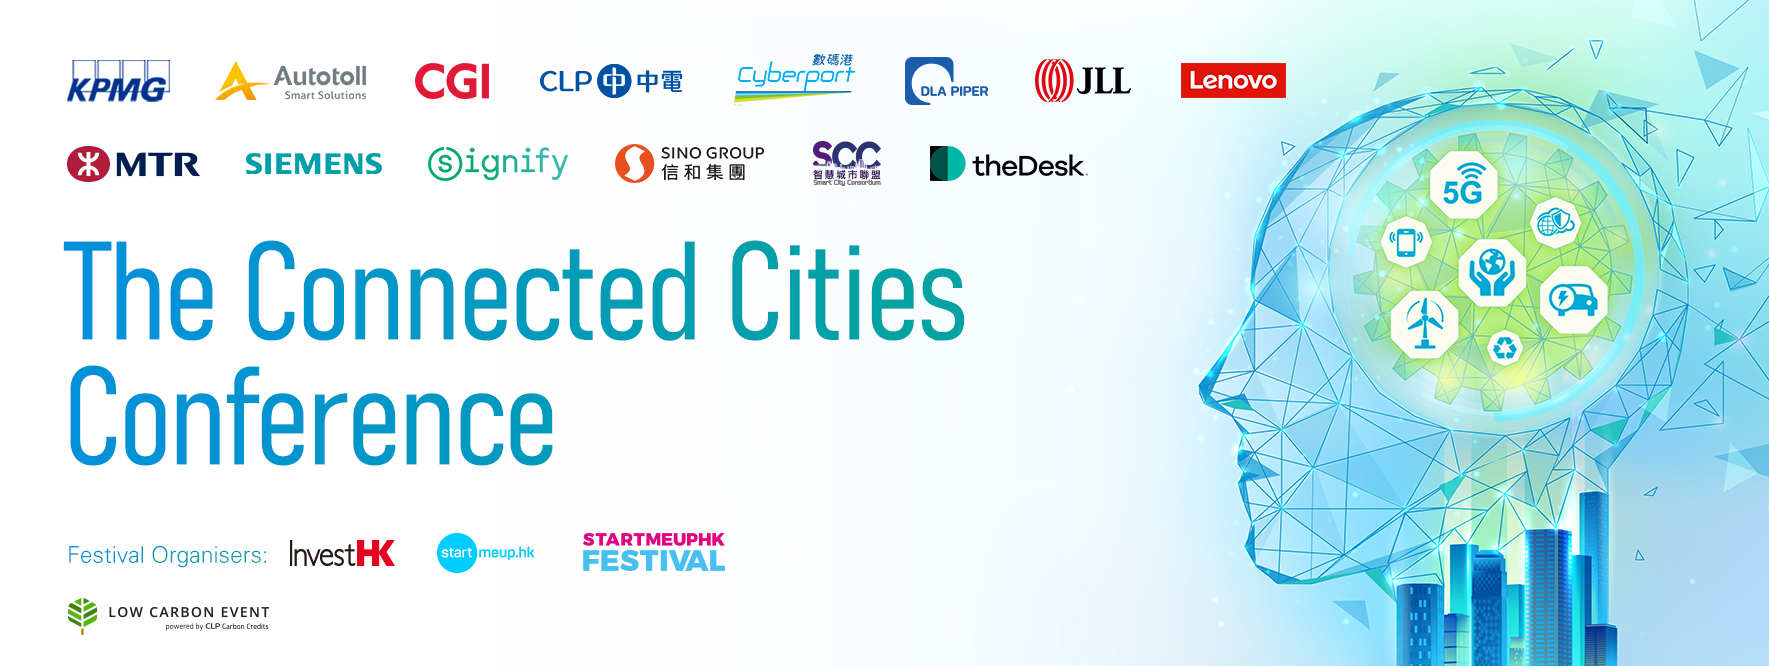 The Connected Cities Conference 